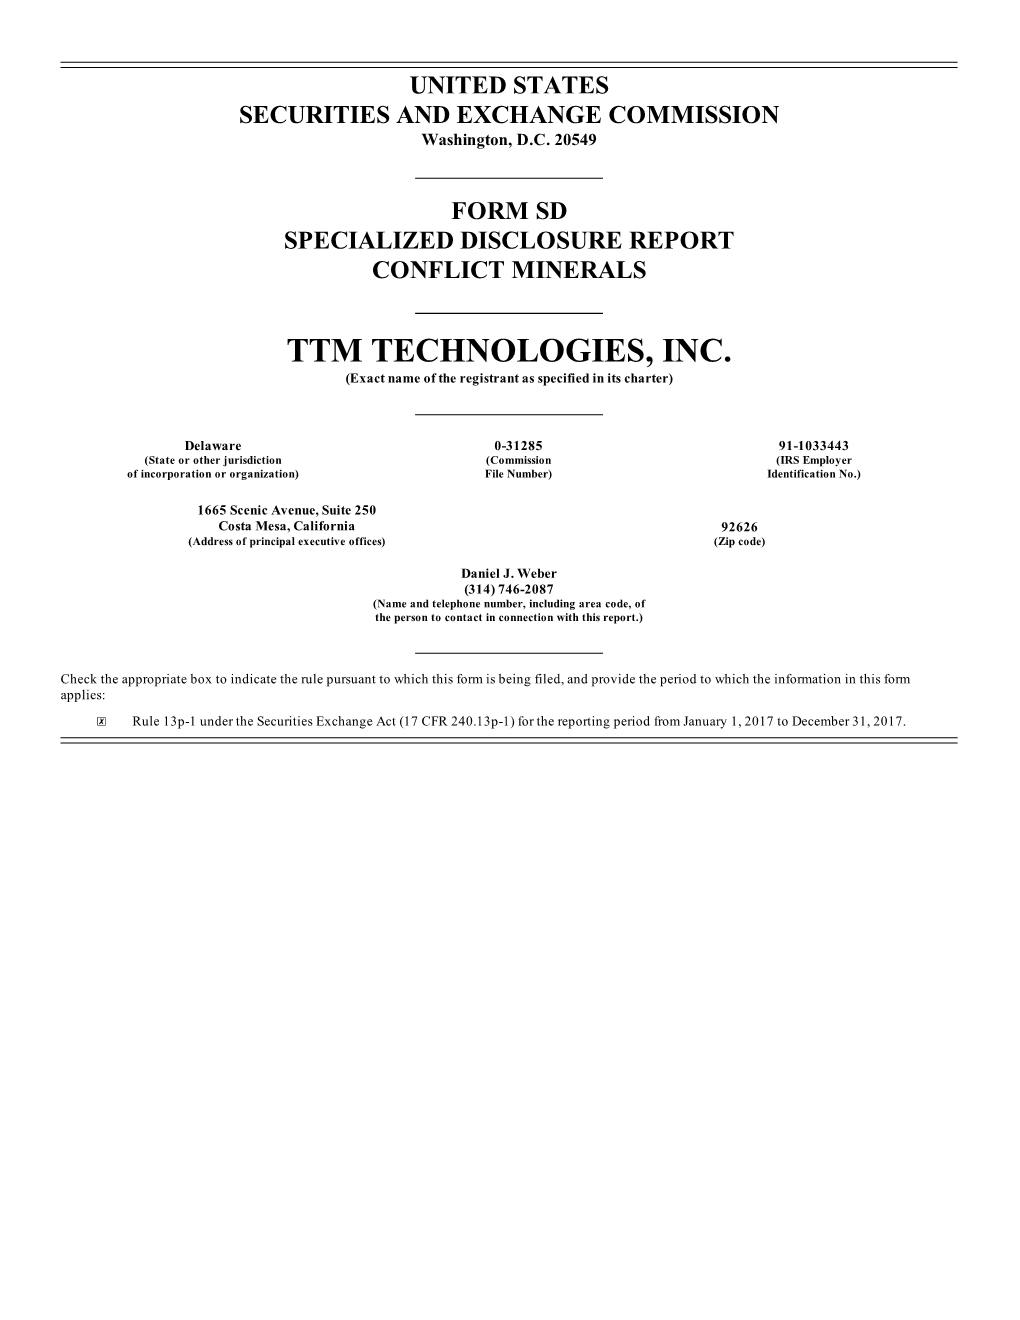 TTM TECHNOLOGIES, INC. (Exact Name of the Registrant As Specified in Its Charter)